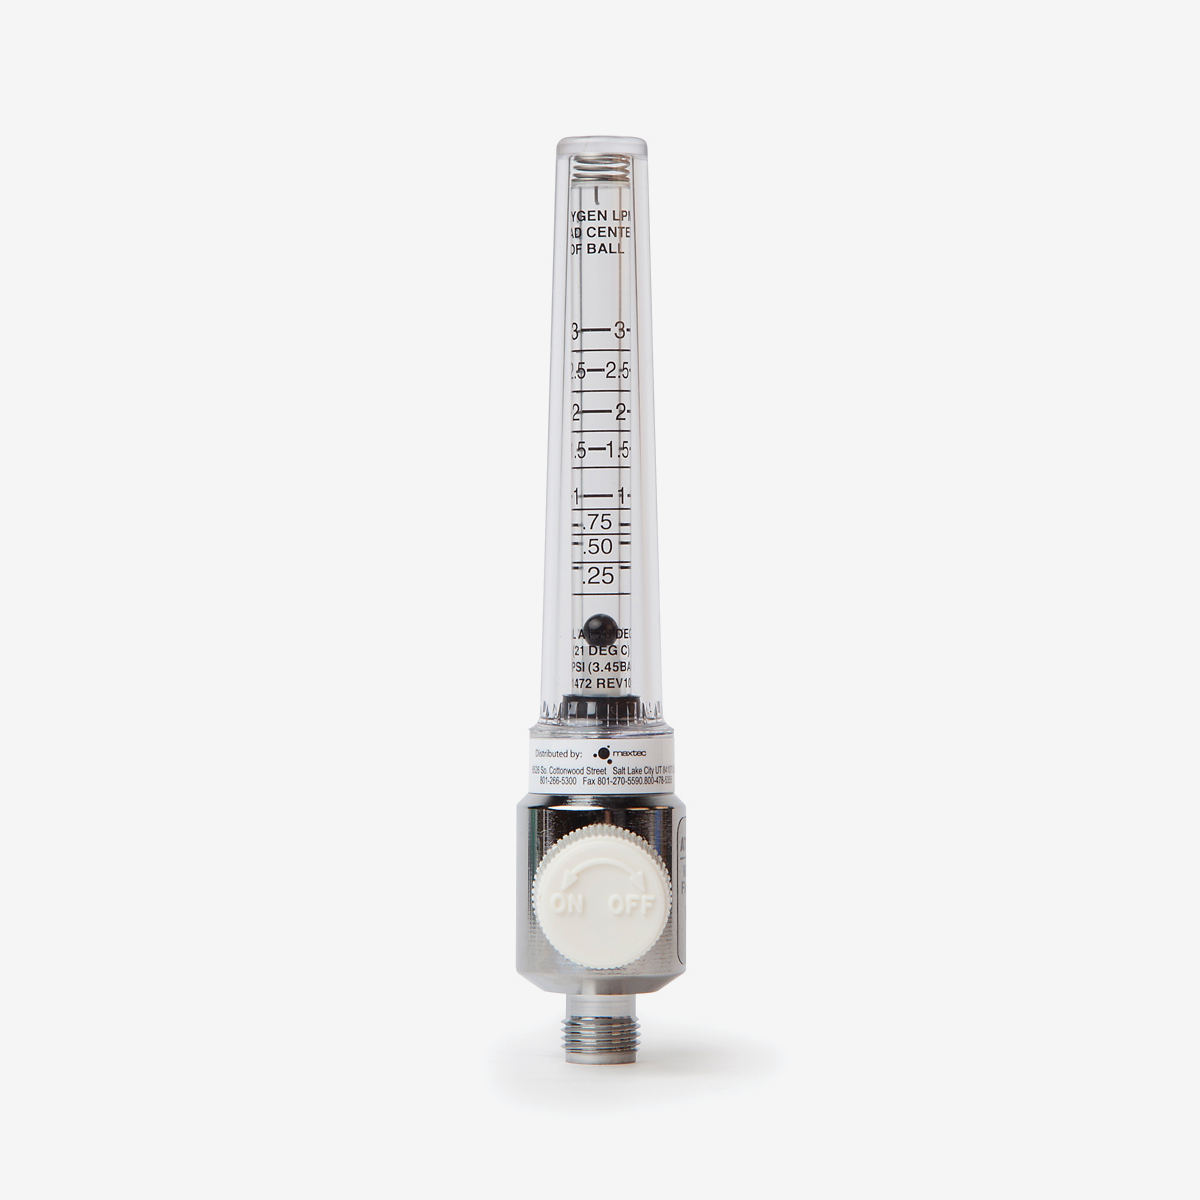 Front view of 0-70 lpm flow meter with white knob